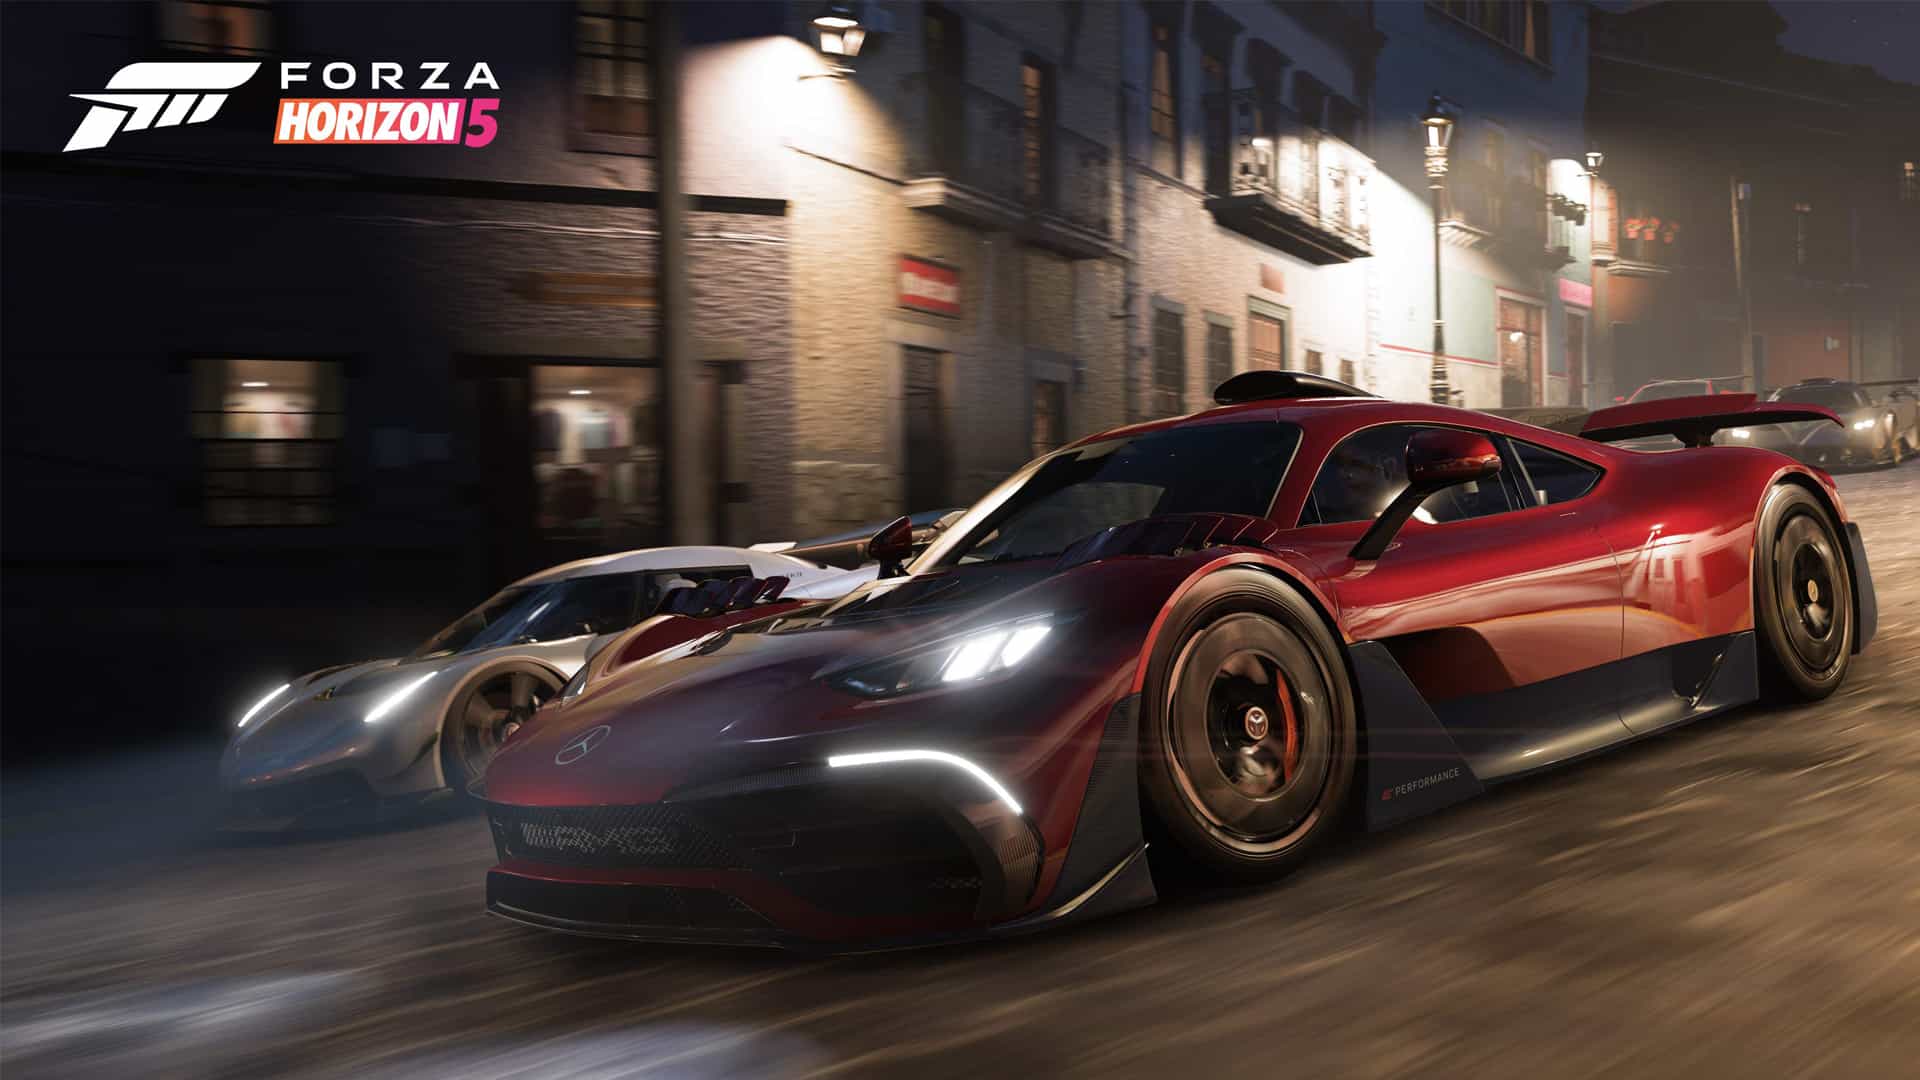 Every car currently known to be in Forza Horizon 5